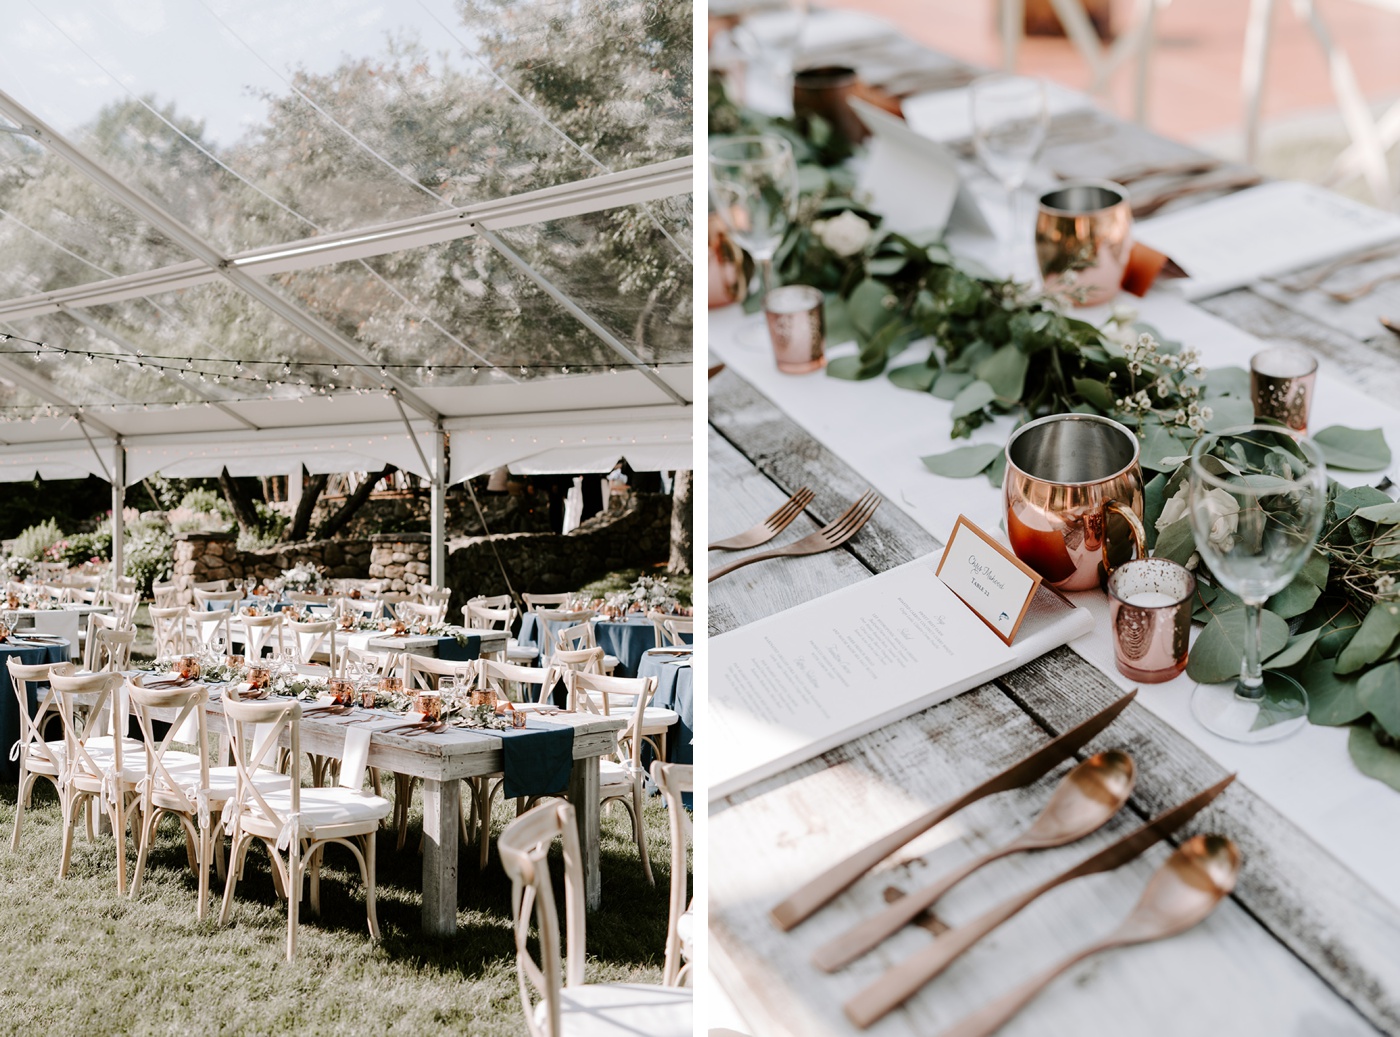 Blue linens, eucalyptus centerpieces, and copper accents for a summer wedding reception